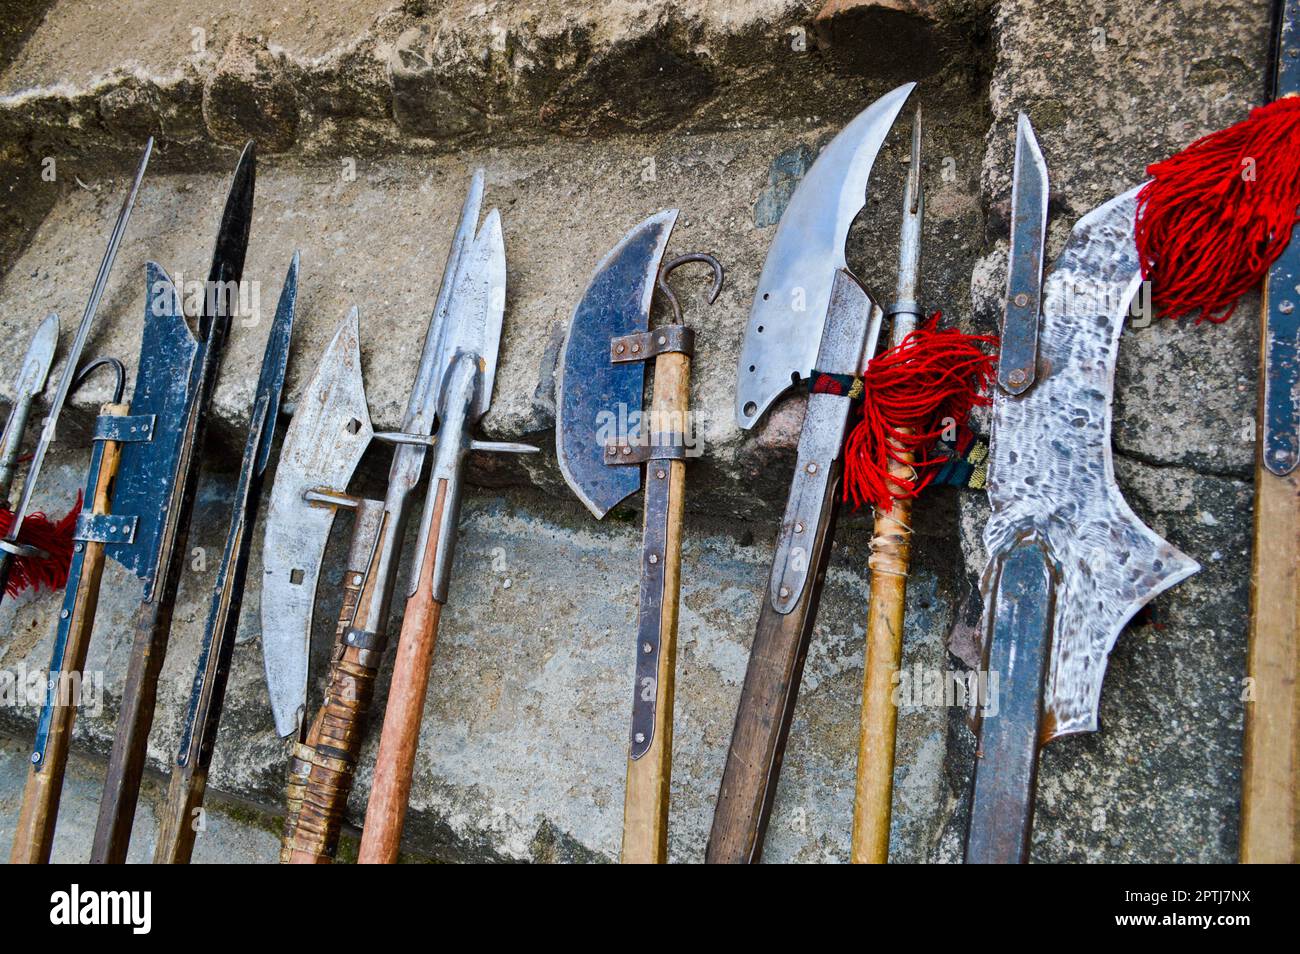 The old ancient medieval cold weapons, axes, olibards, knives, swords with wooden handles lick on the stone steps of the castle. Stock Photo